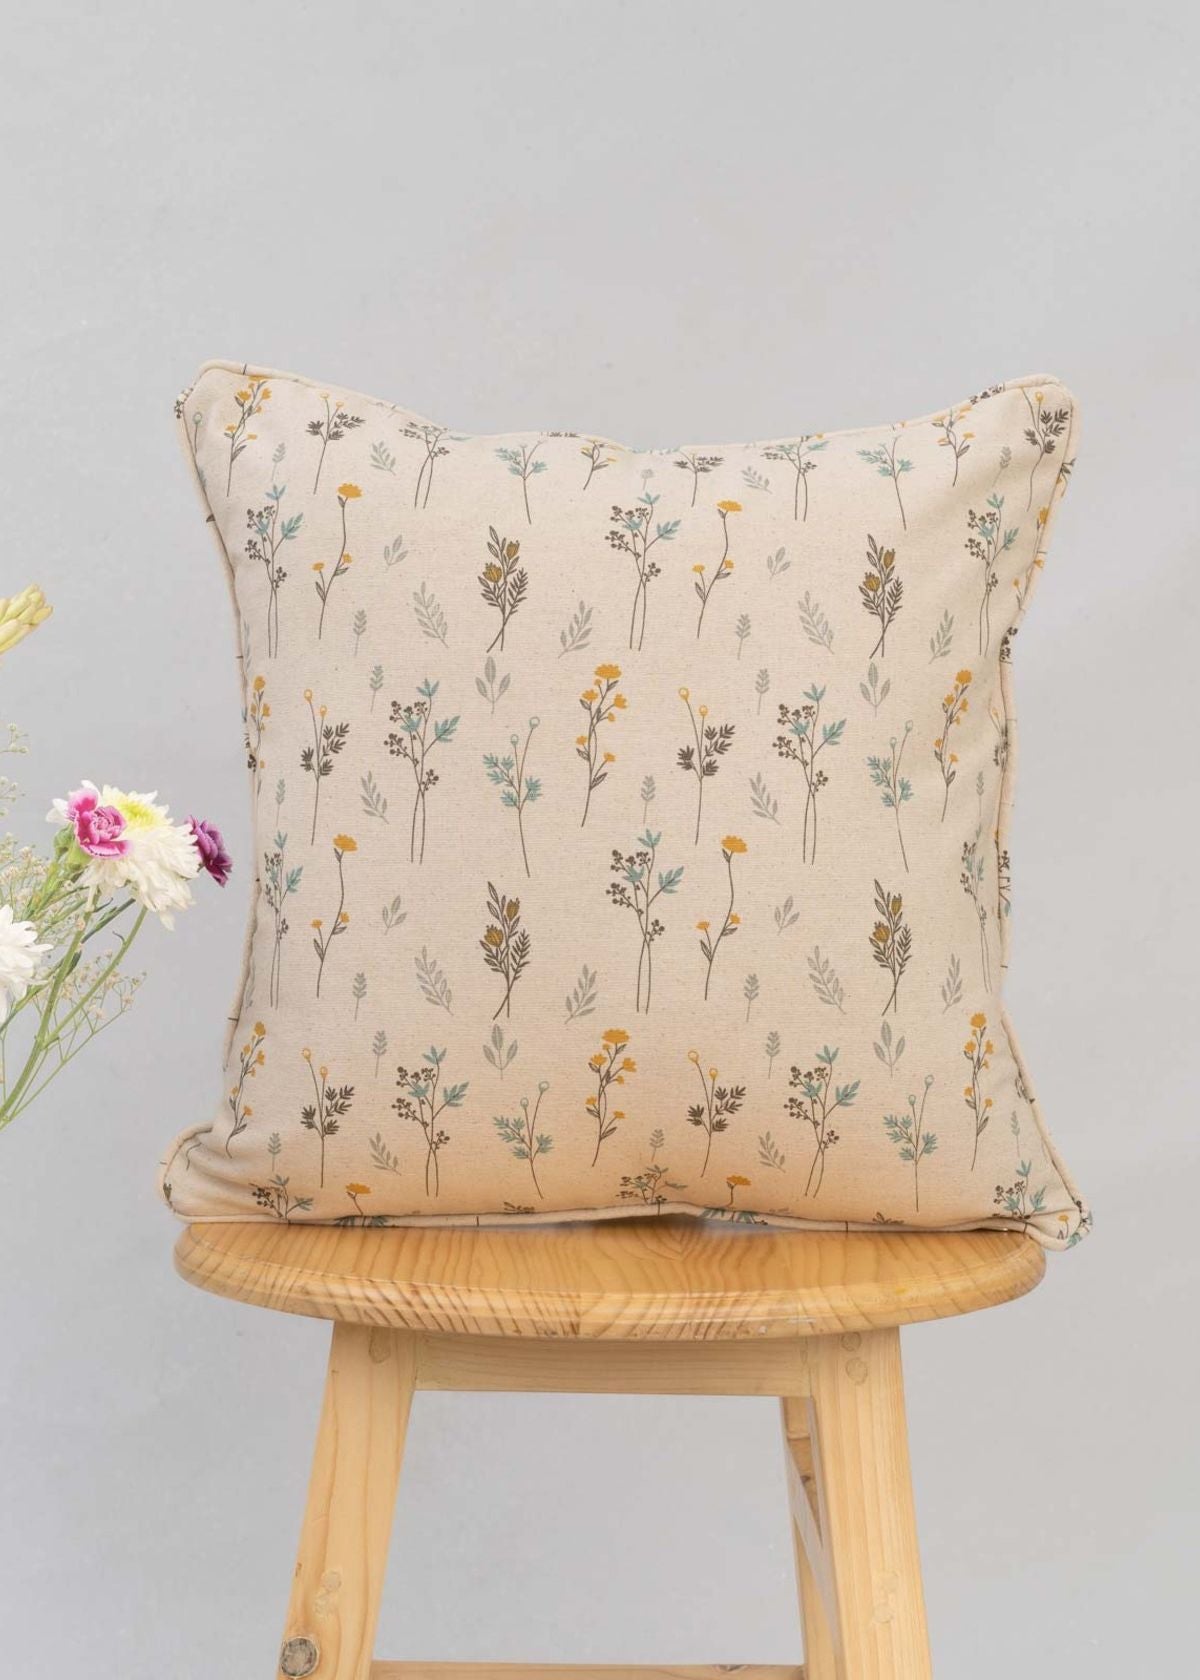 Blooming Meadows Printed Cotton Cushion Cover - Beige